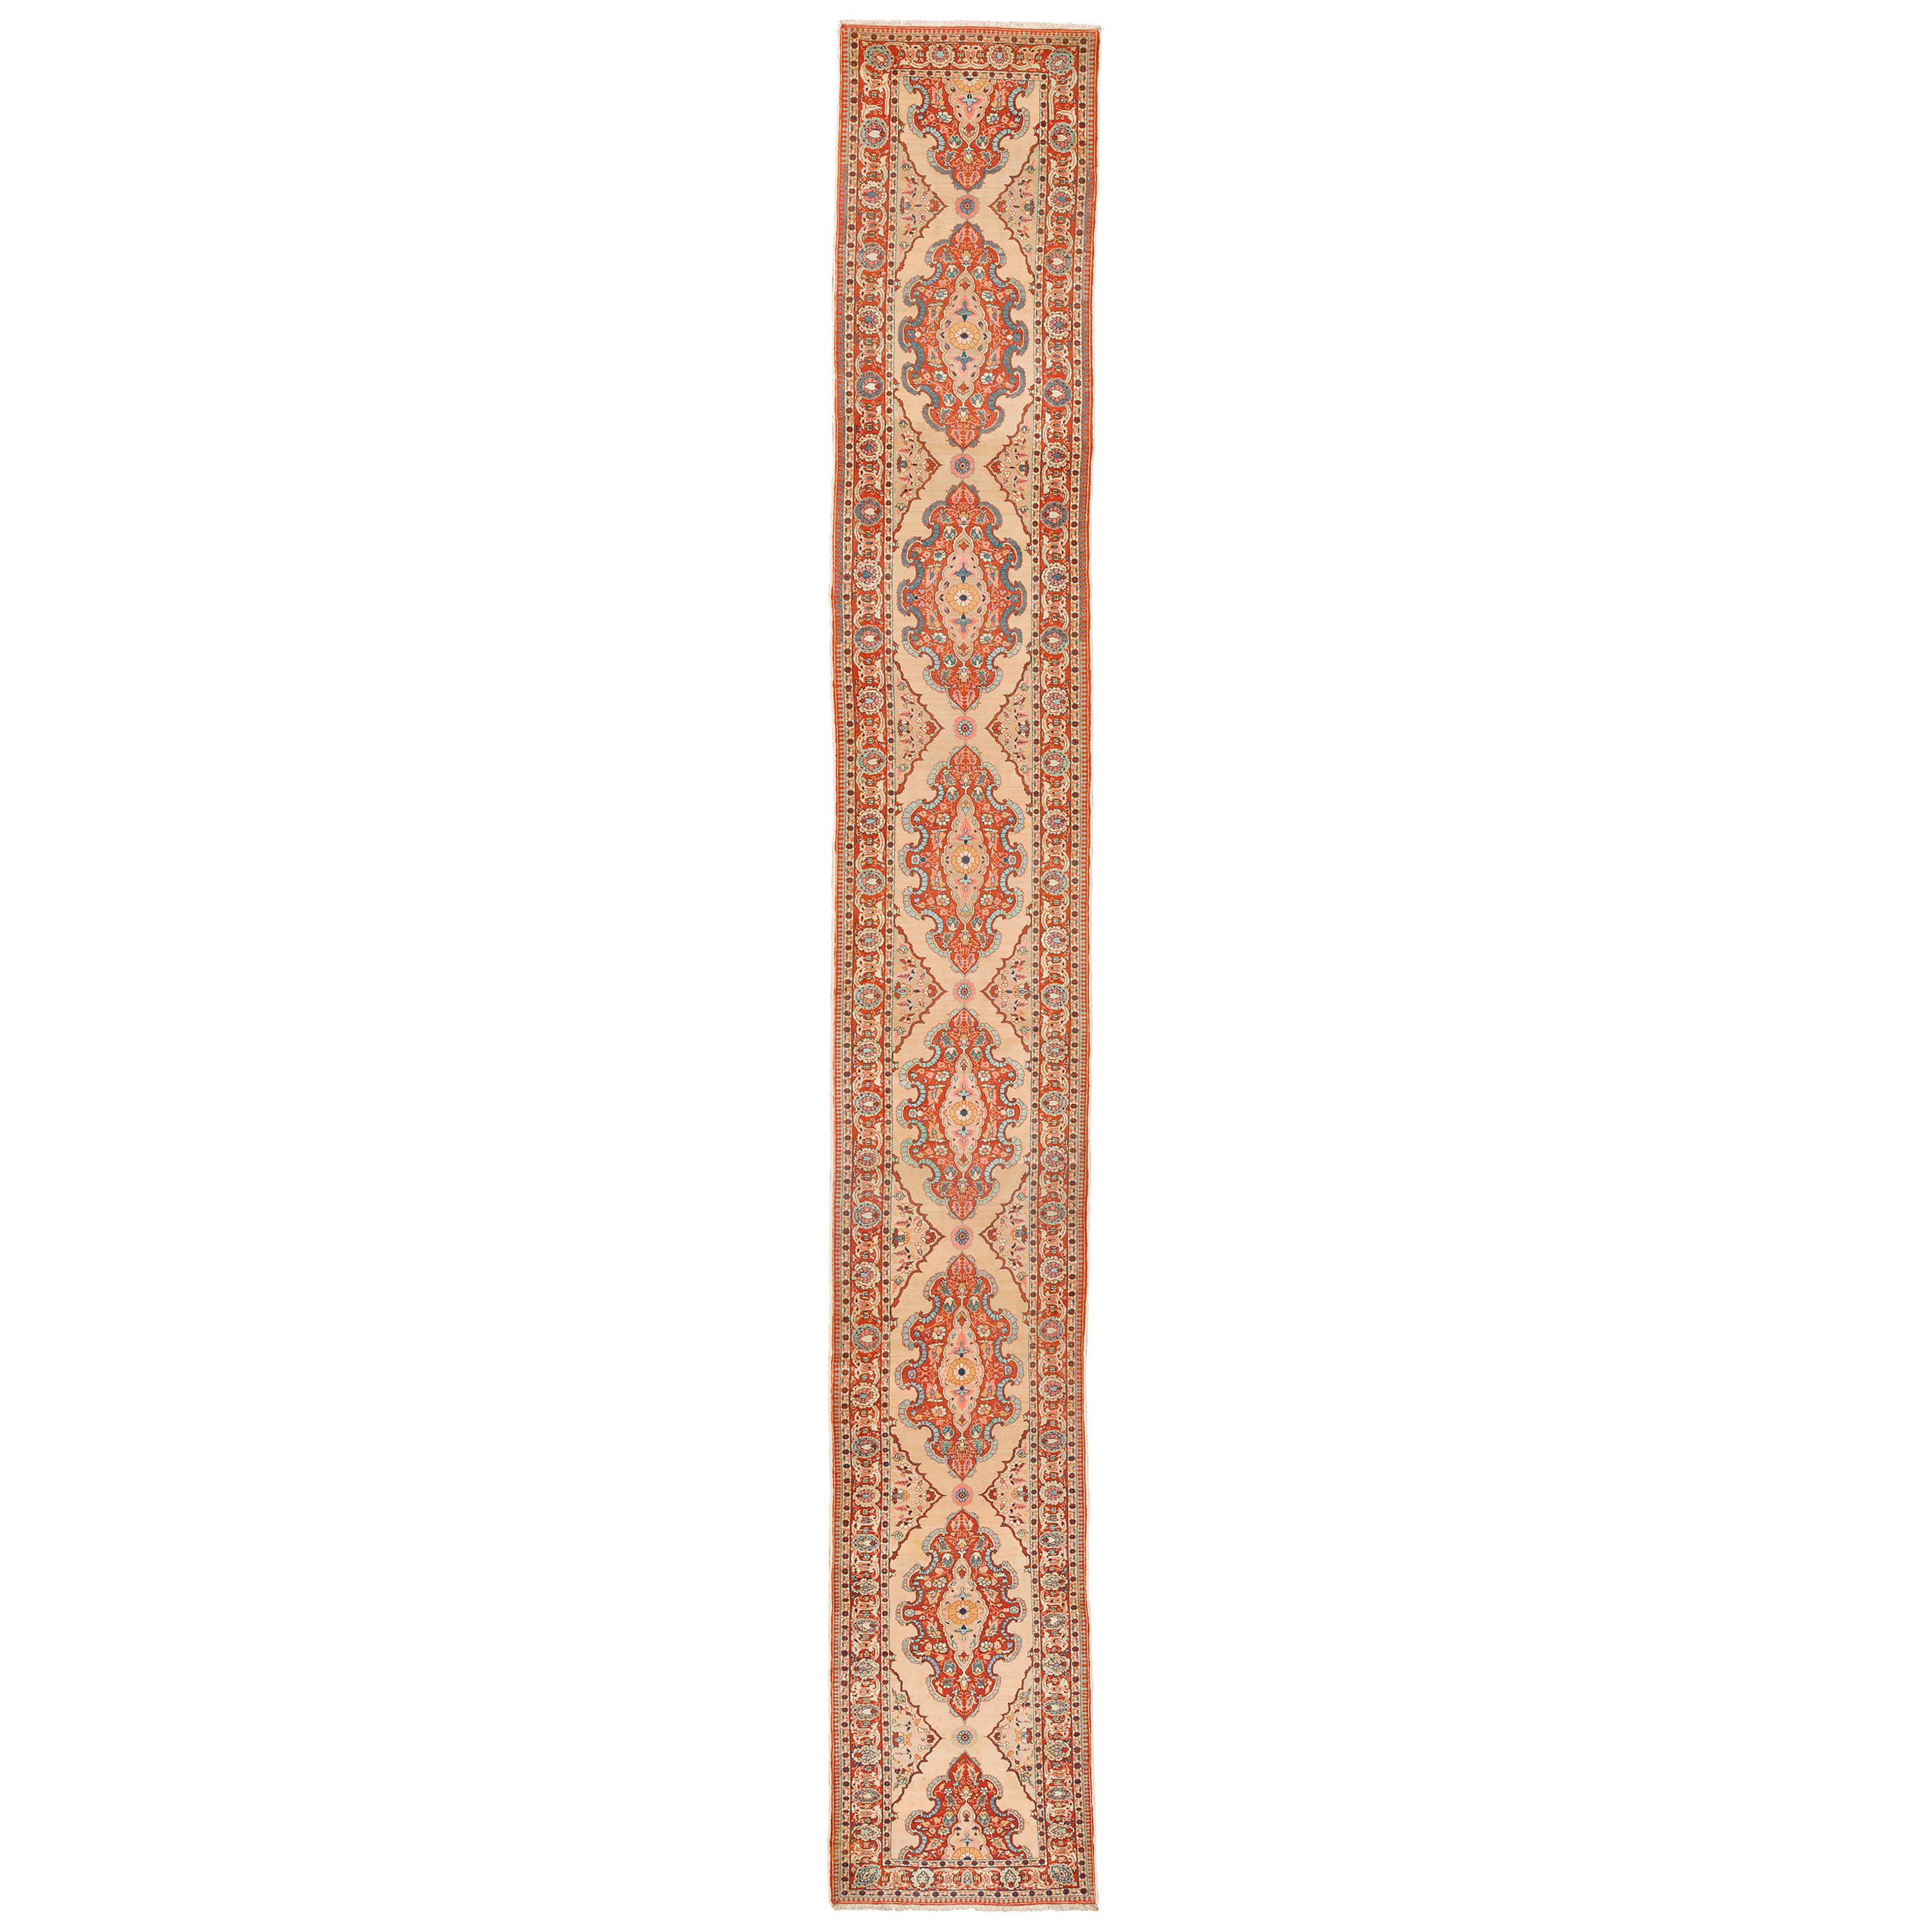 Early 20th Century Persian Tabriz Runner For Sale